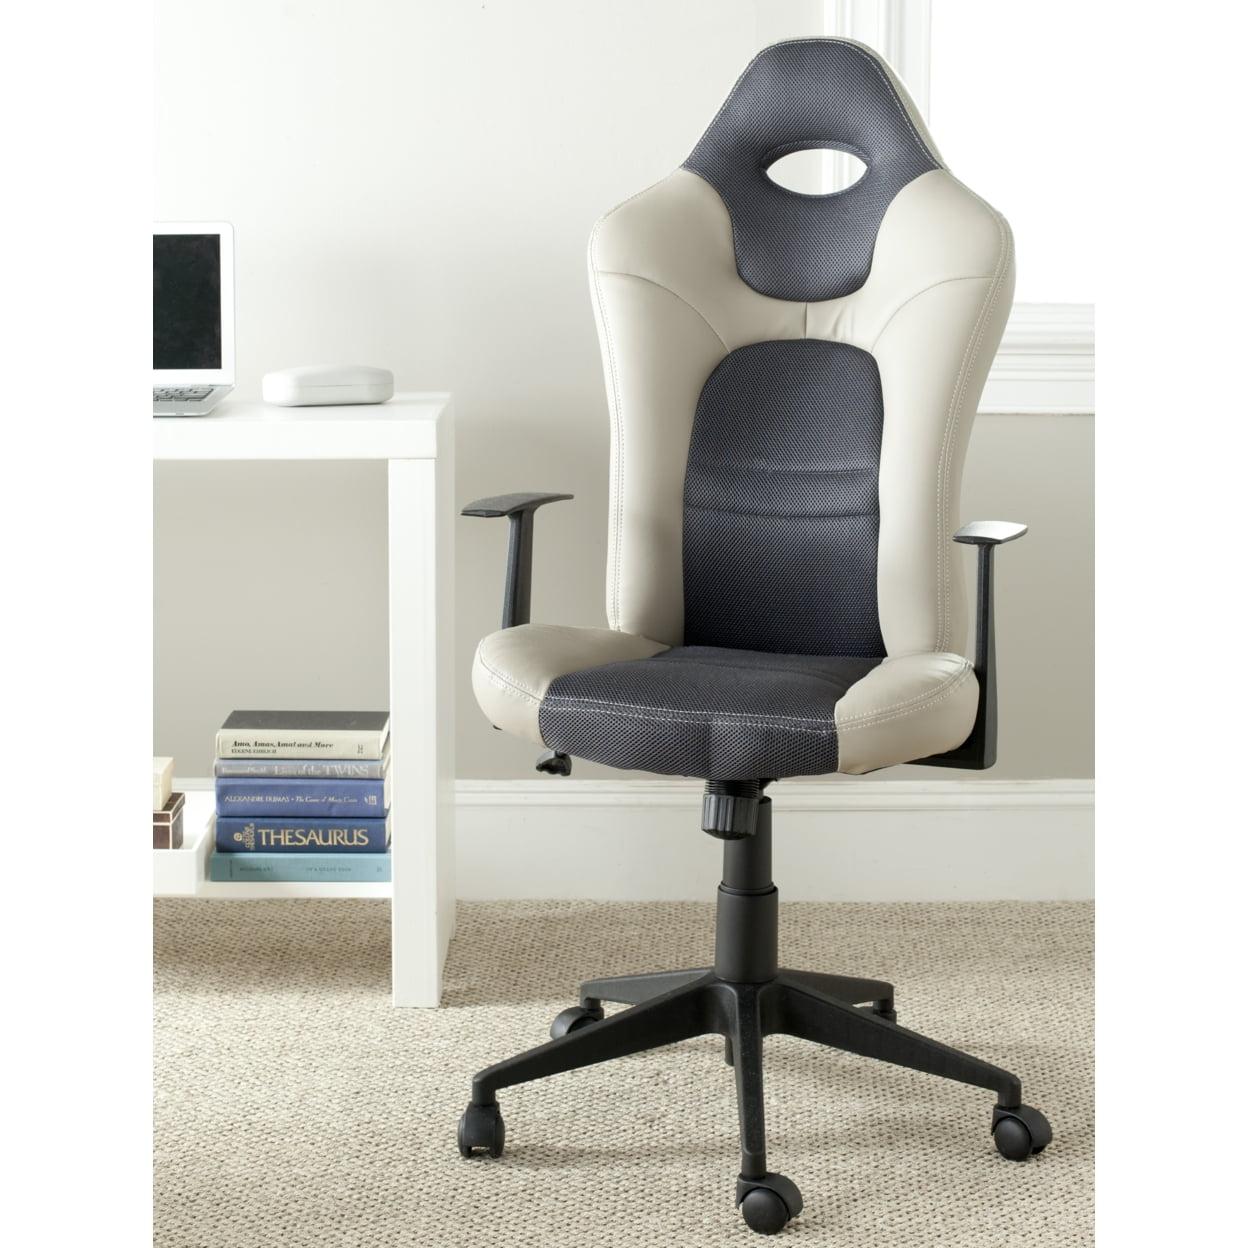 High-Back Racing Desk Chair in Gray and Black with Metal Frame